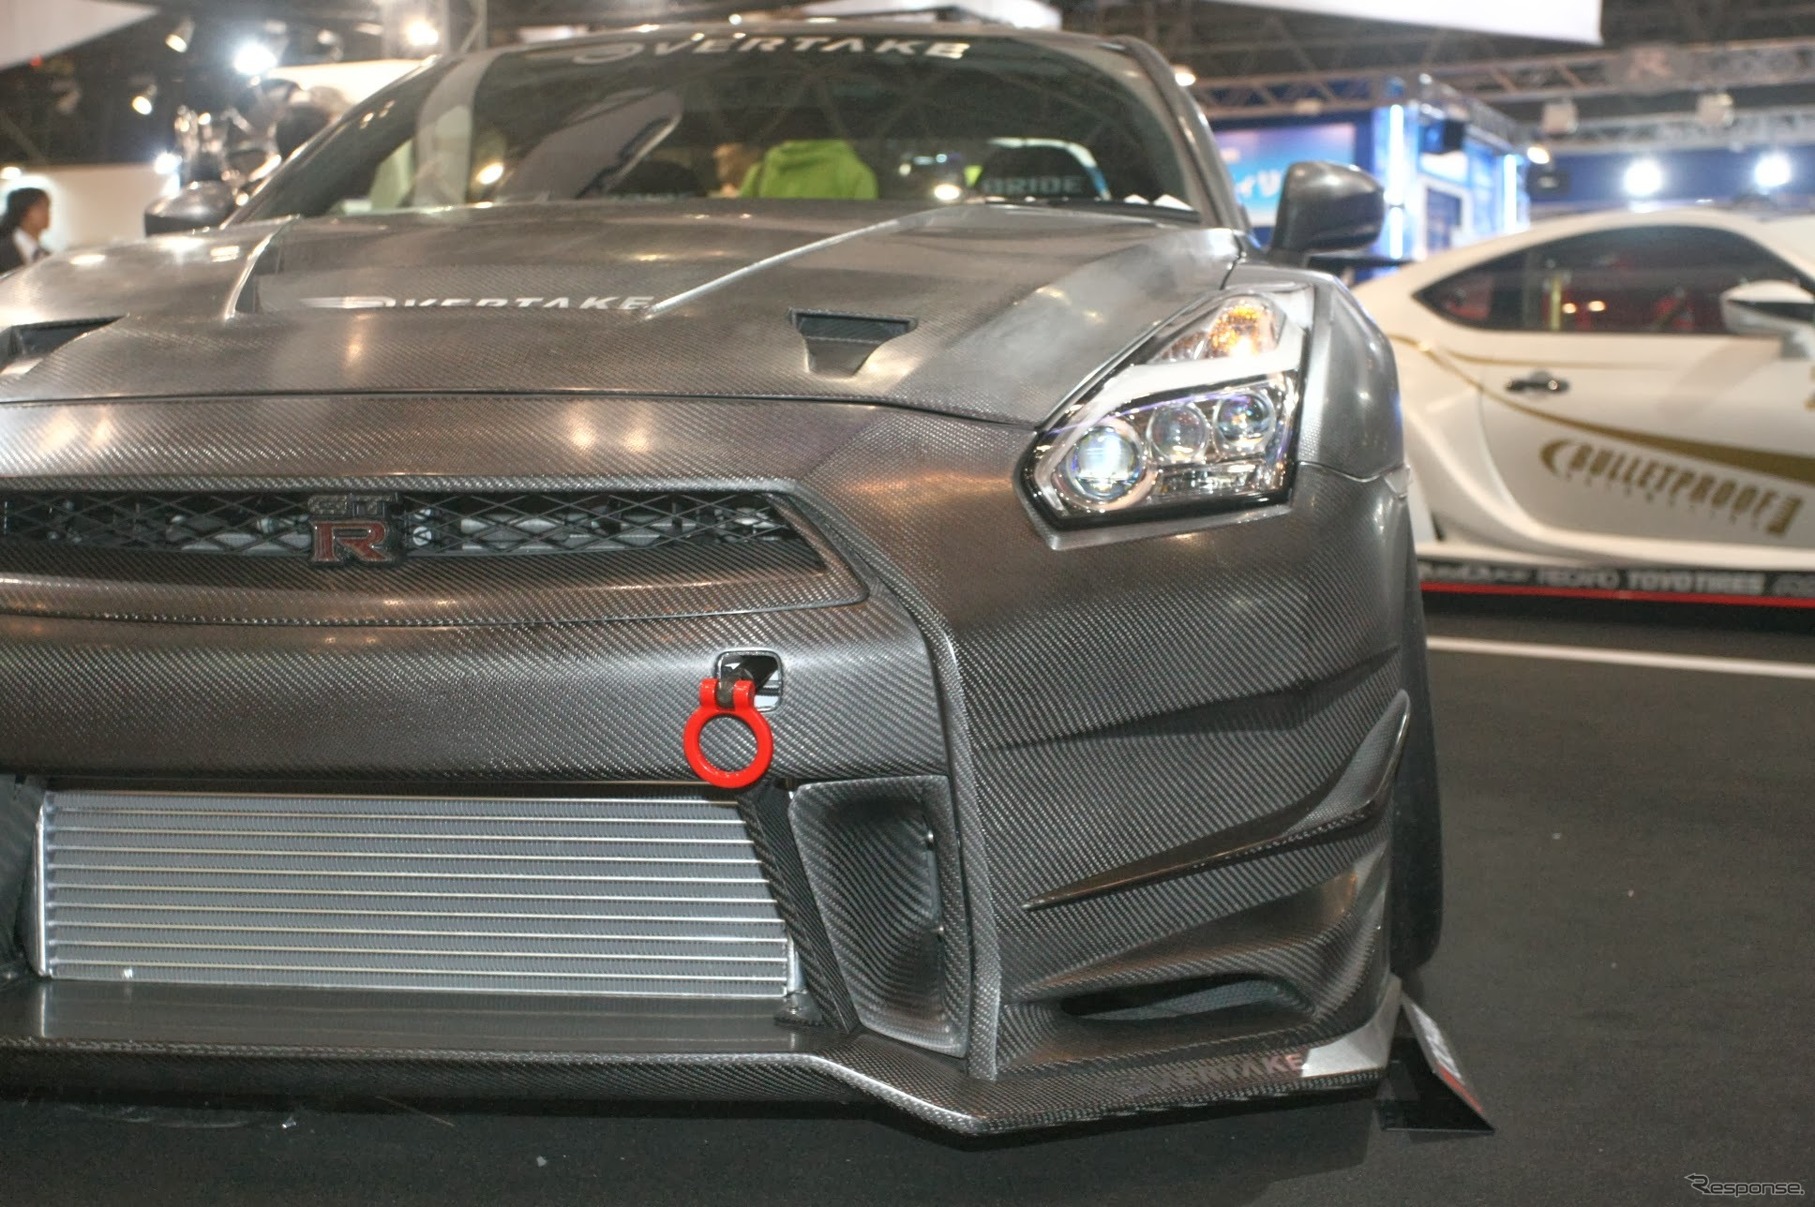 RAYS 日産GT-R